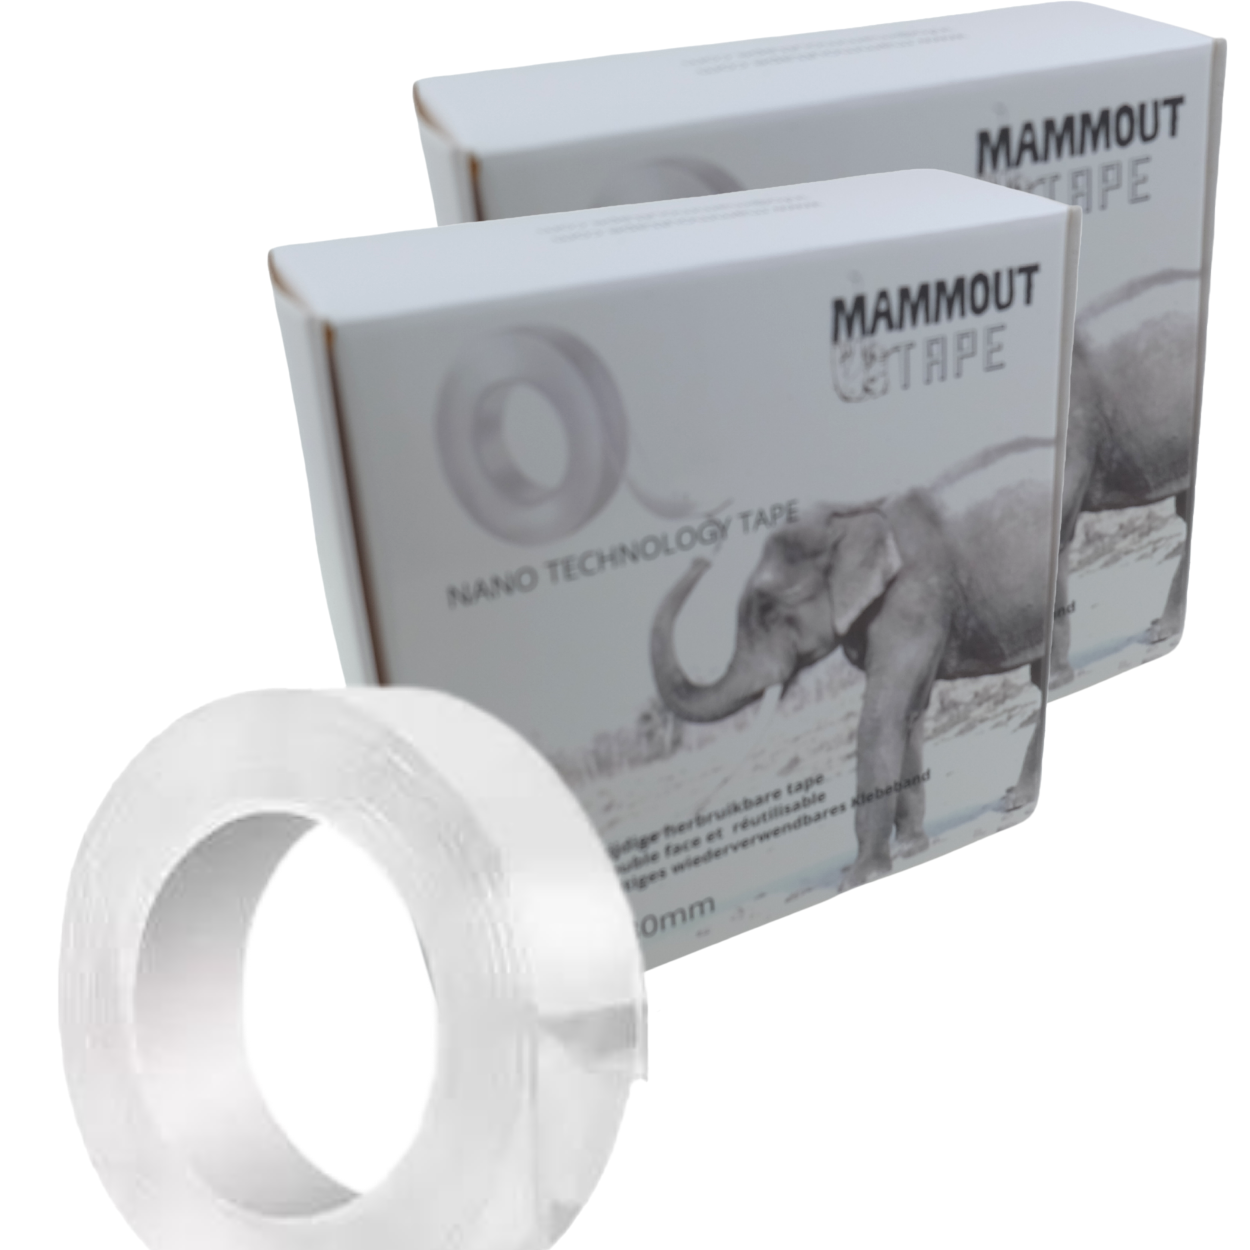 2 3 meter Mammout Tape